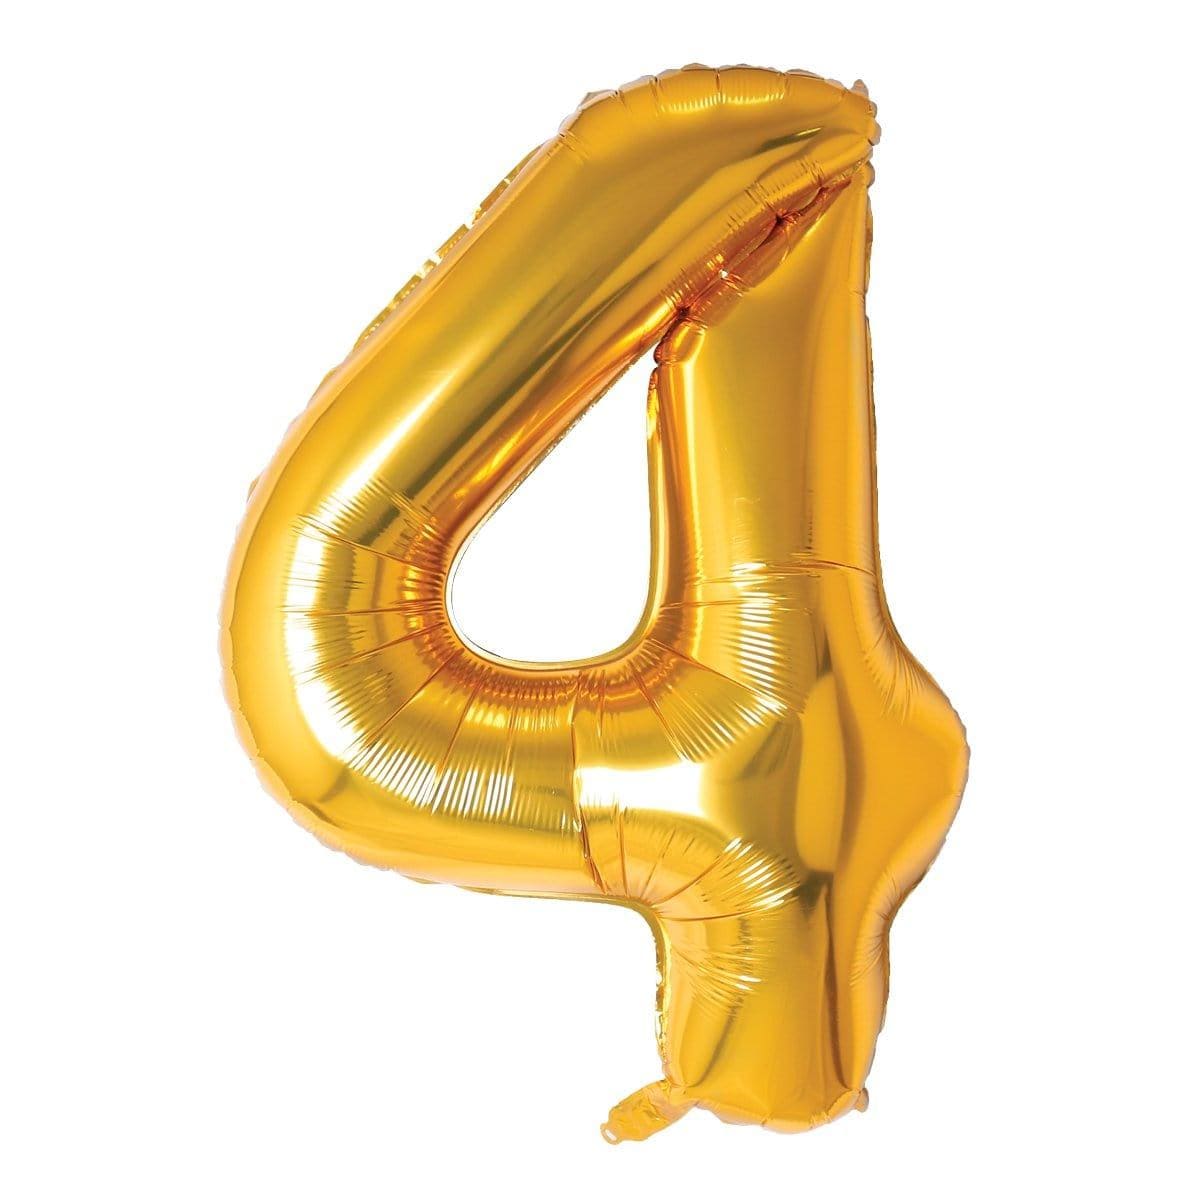 Buy Balloons Gold Number 4 Foil Balloon, 34 Inches sold at Party Expert